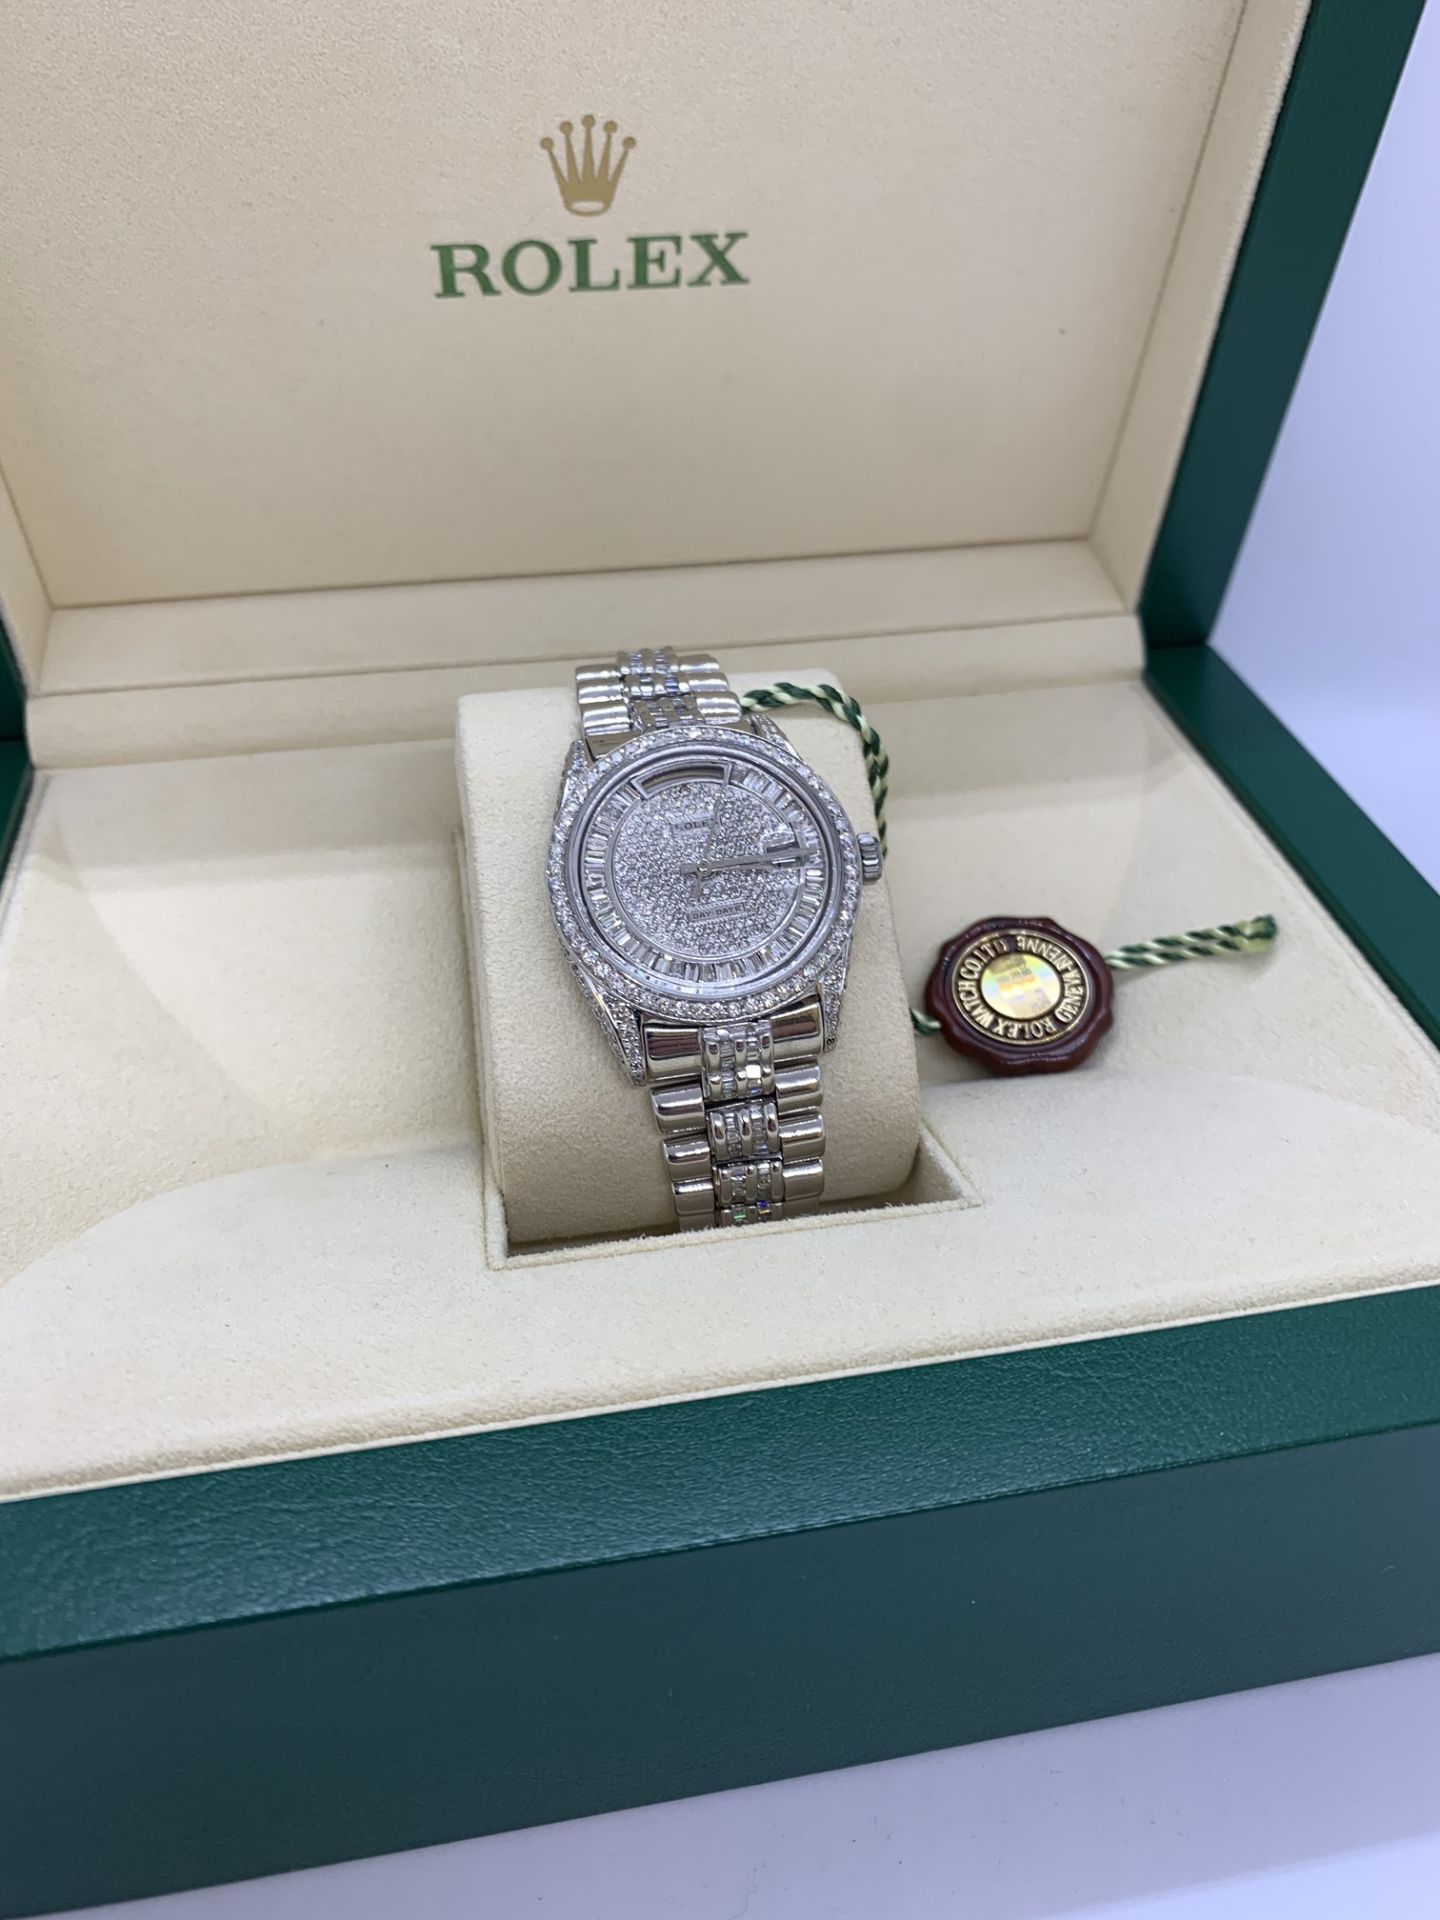 36mm DIAMOND SET DAY-DATE WATCH MARKED ROLEX SET IN WHITE METAL (TESTED AS GOLD) - Image 6 of 15